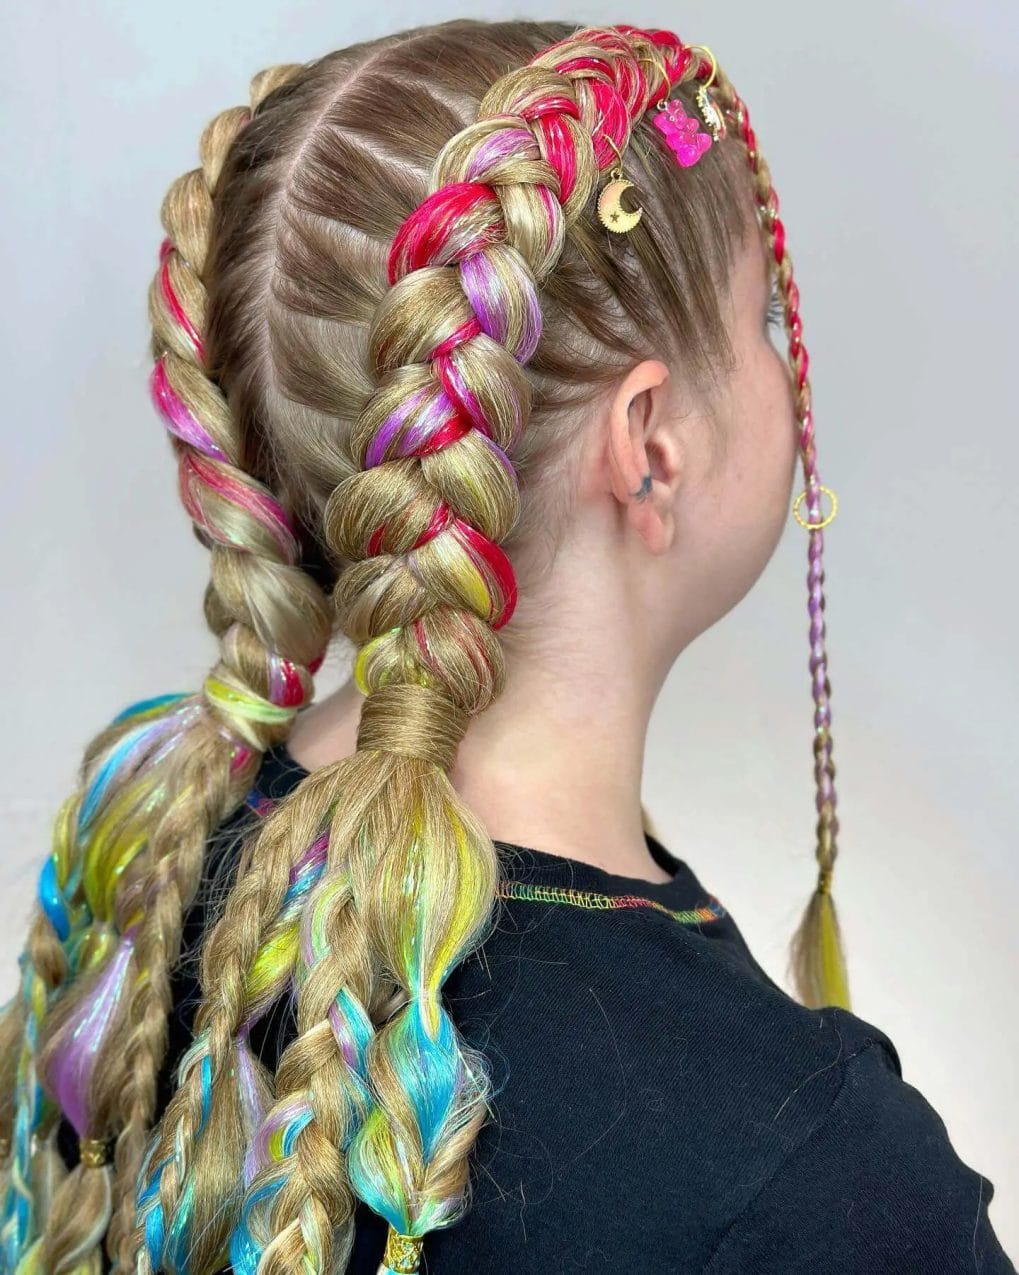 Thick Dutch braids with metallic pink and holographic strands, adorned with charms for a whimsical festival look.